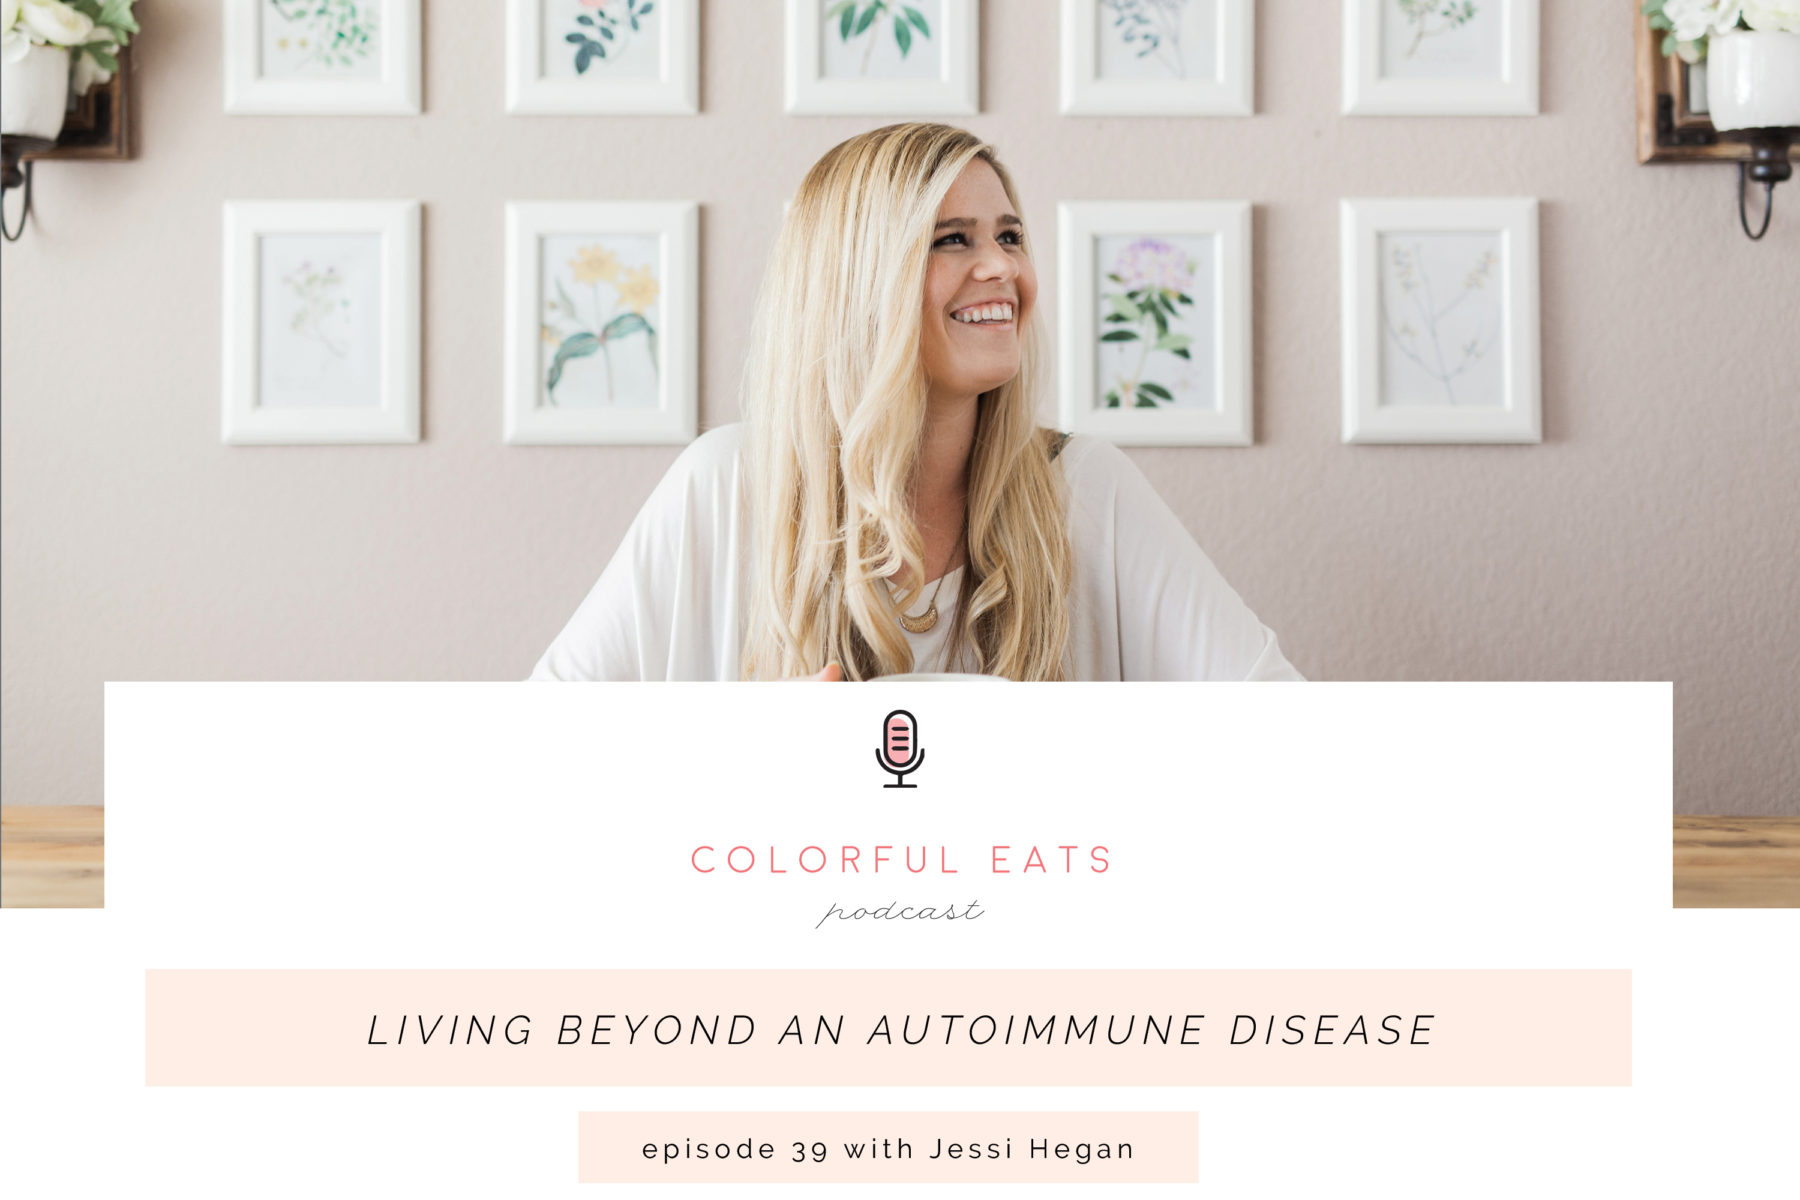 Colorful Eats Podcast Episode 39: Living Beyond an Autoimmune Disease with Jessi Hegan